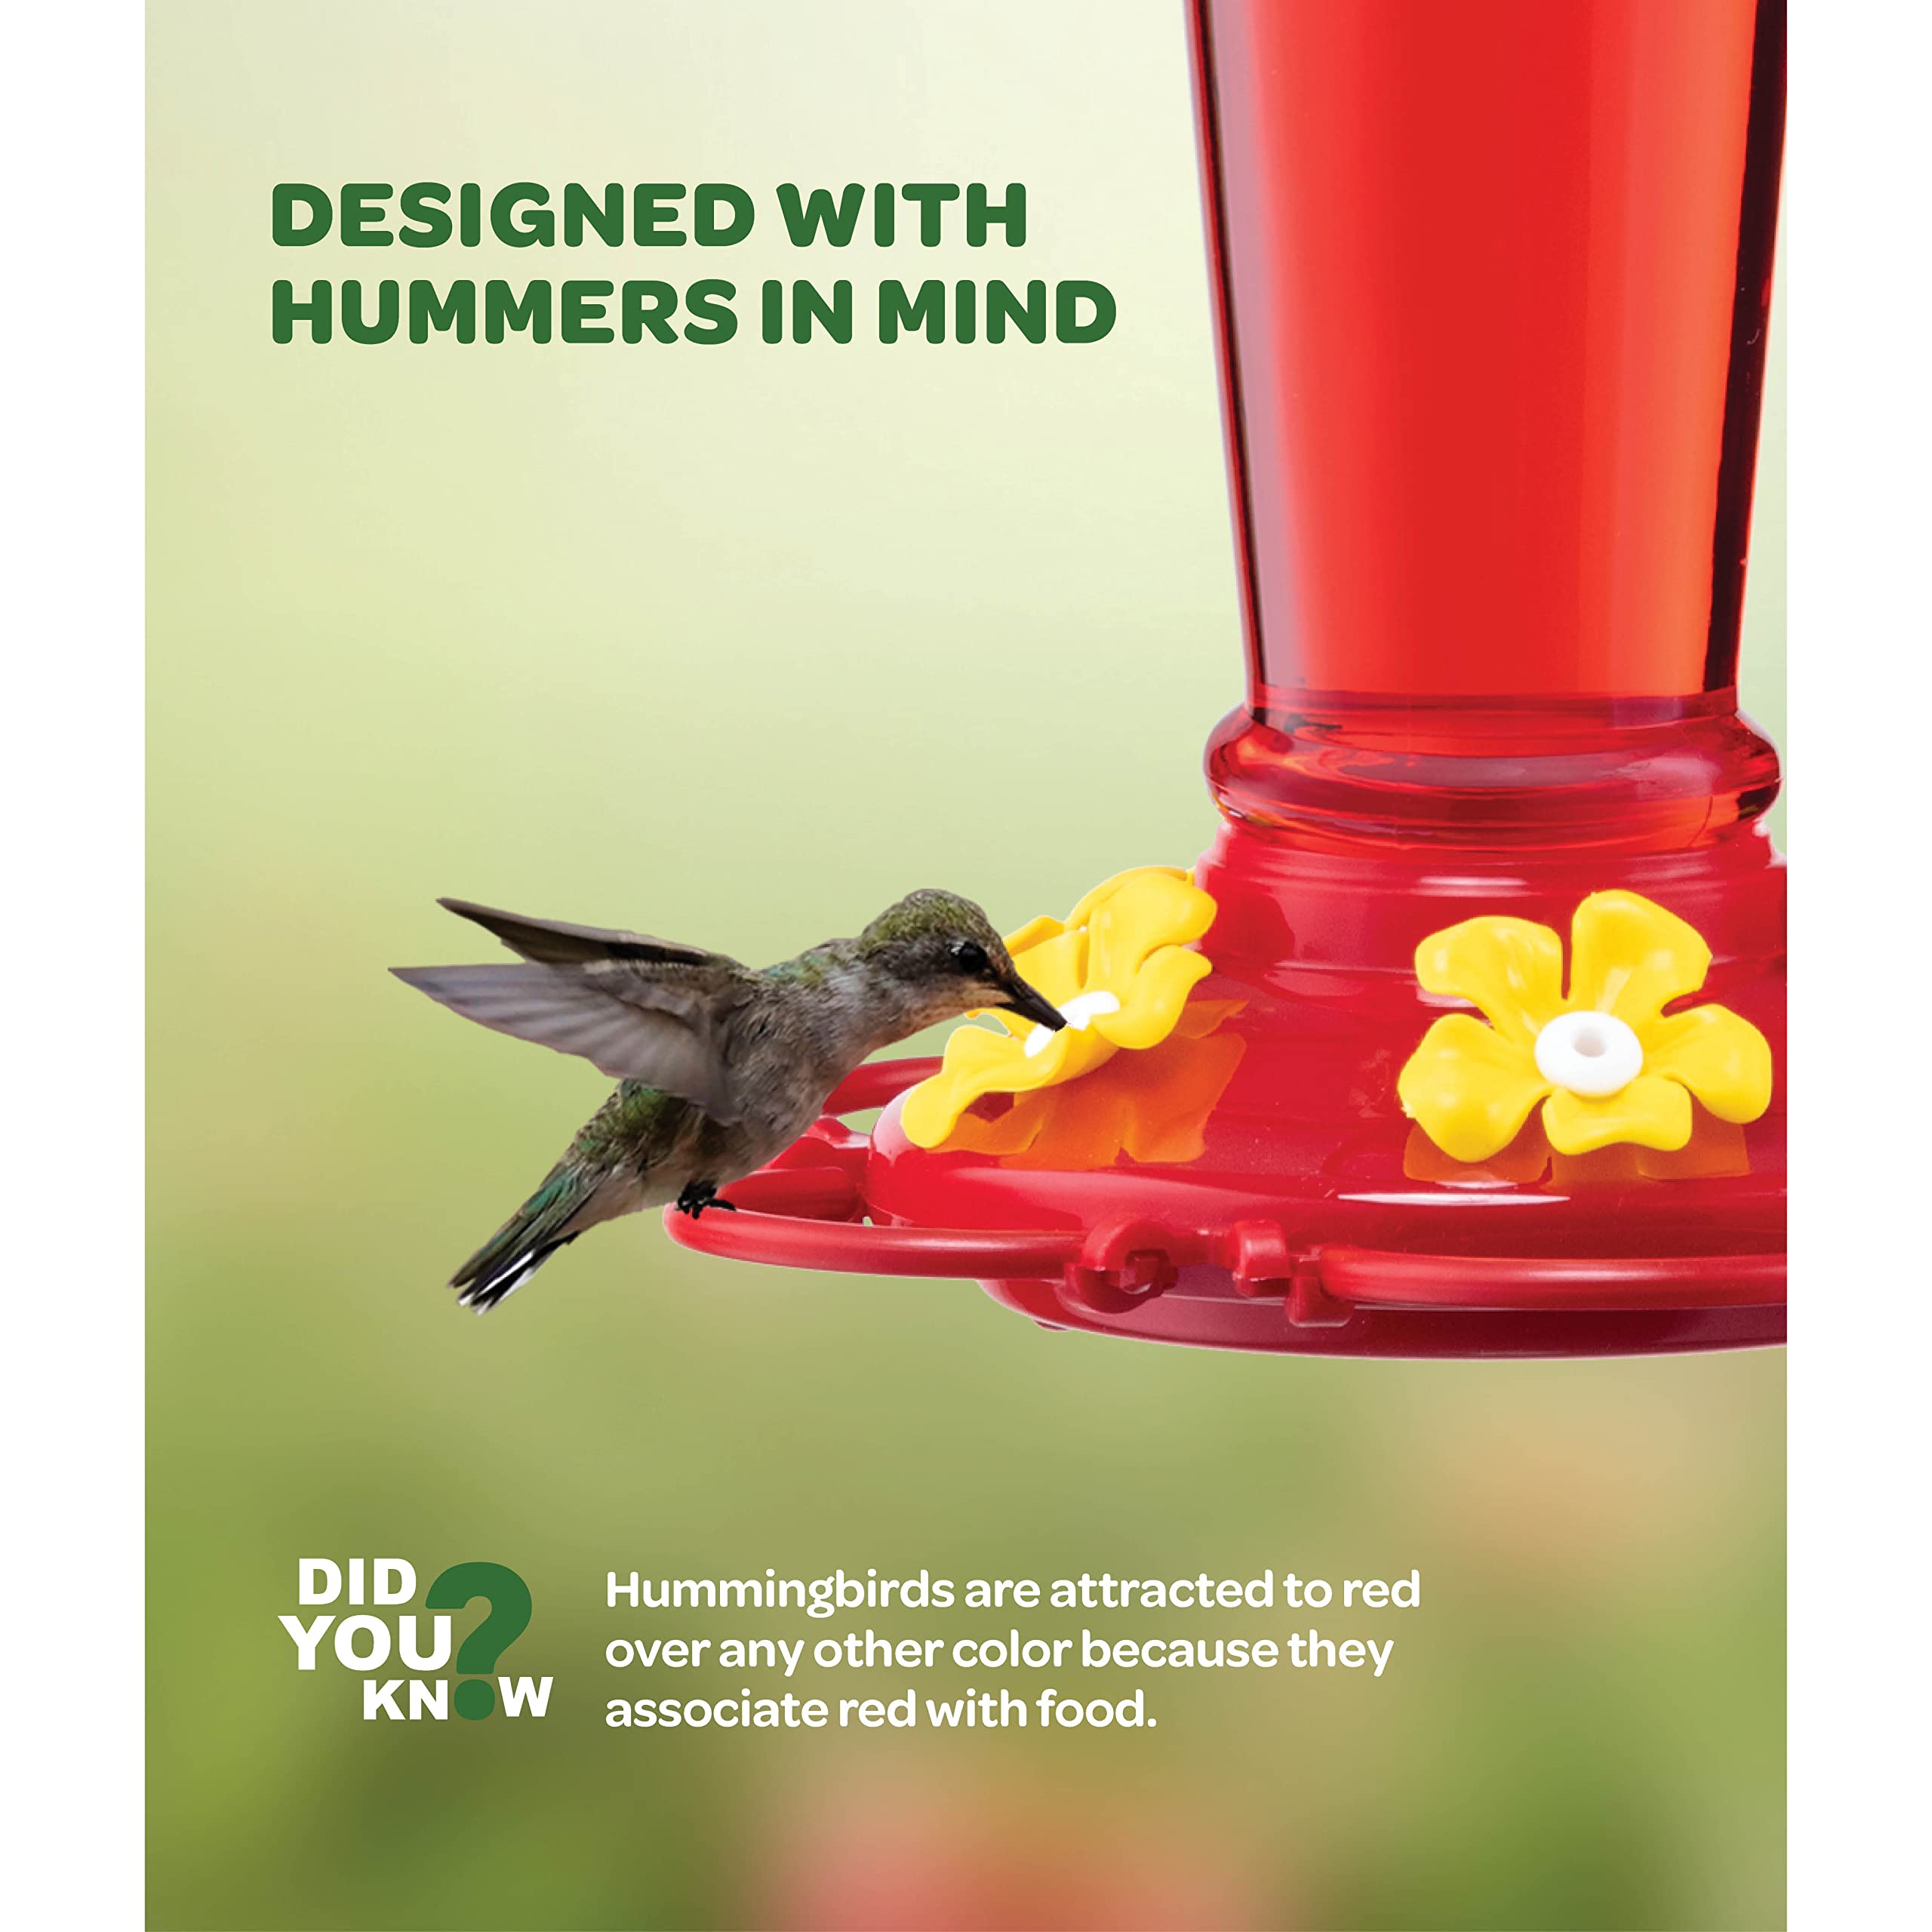 Hummingbird Feeder 10 oz. Plastic Hummingbird Feeders for Outdoors, with Built-in Ant Guard - Circular Perch with 5 Feeding Ports - Wide Mouth for Easy Filling/2 Part Base for Easy Cleaning  - Very Good